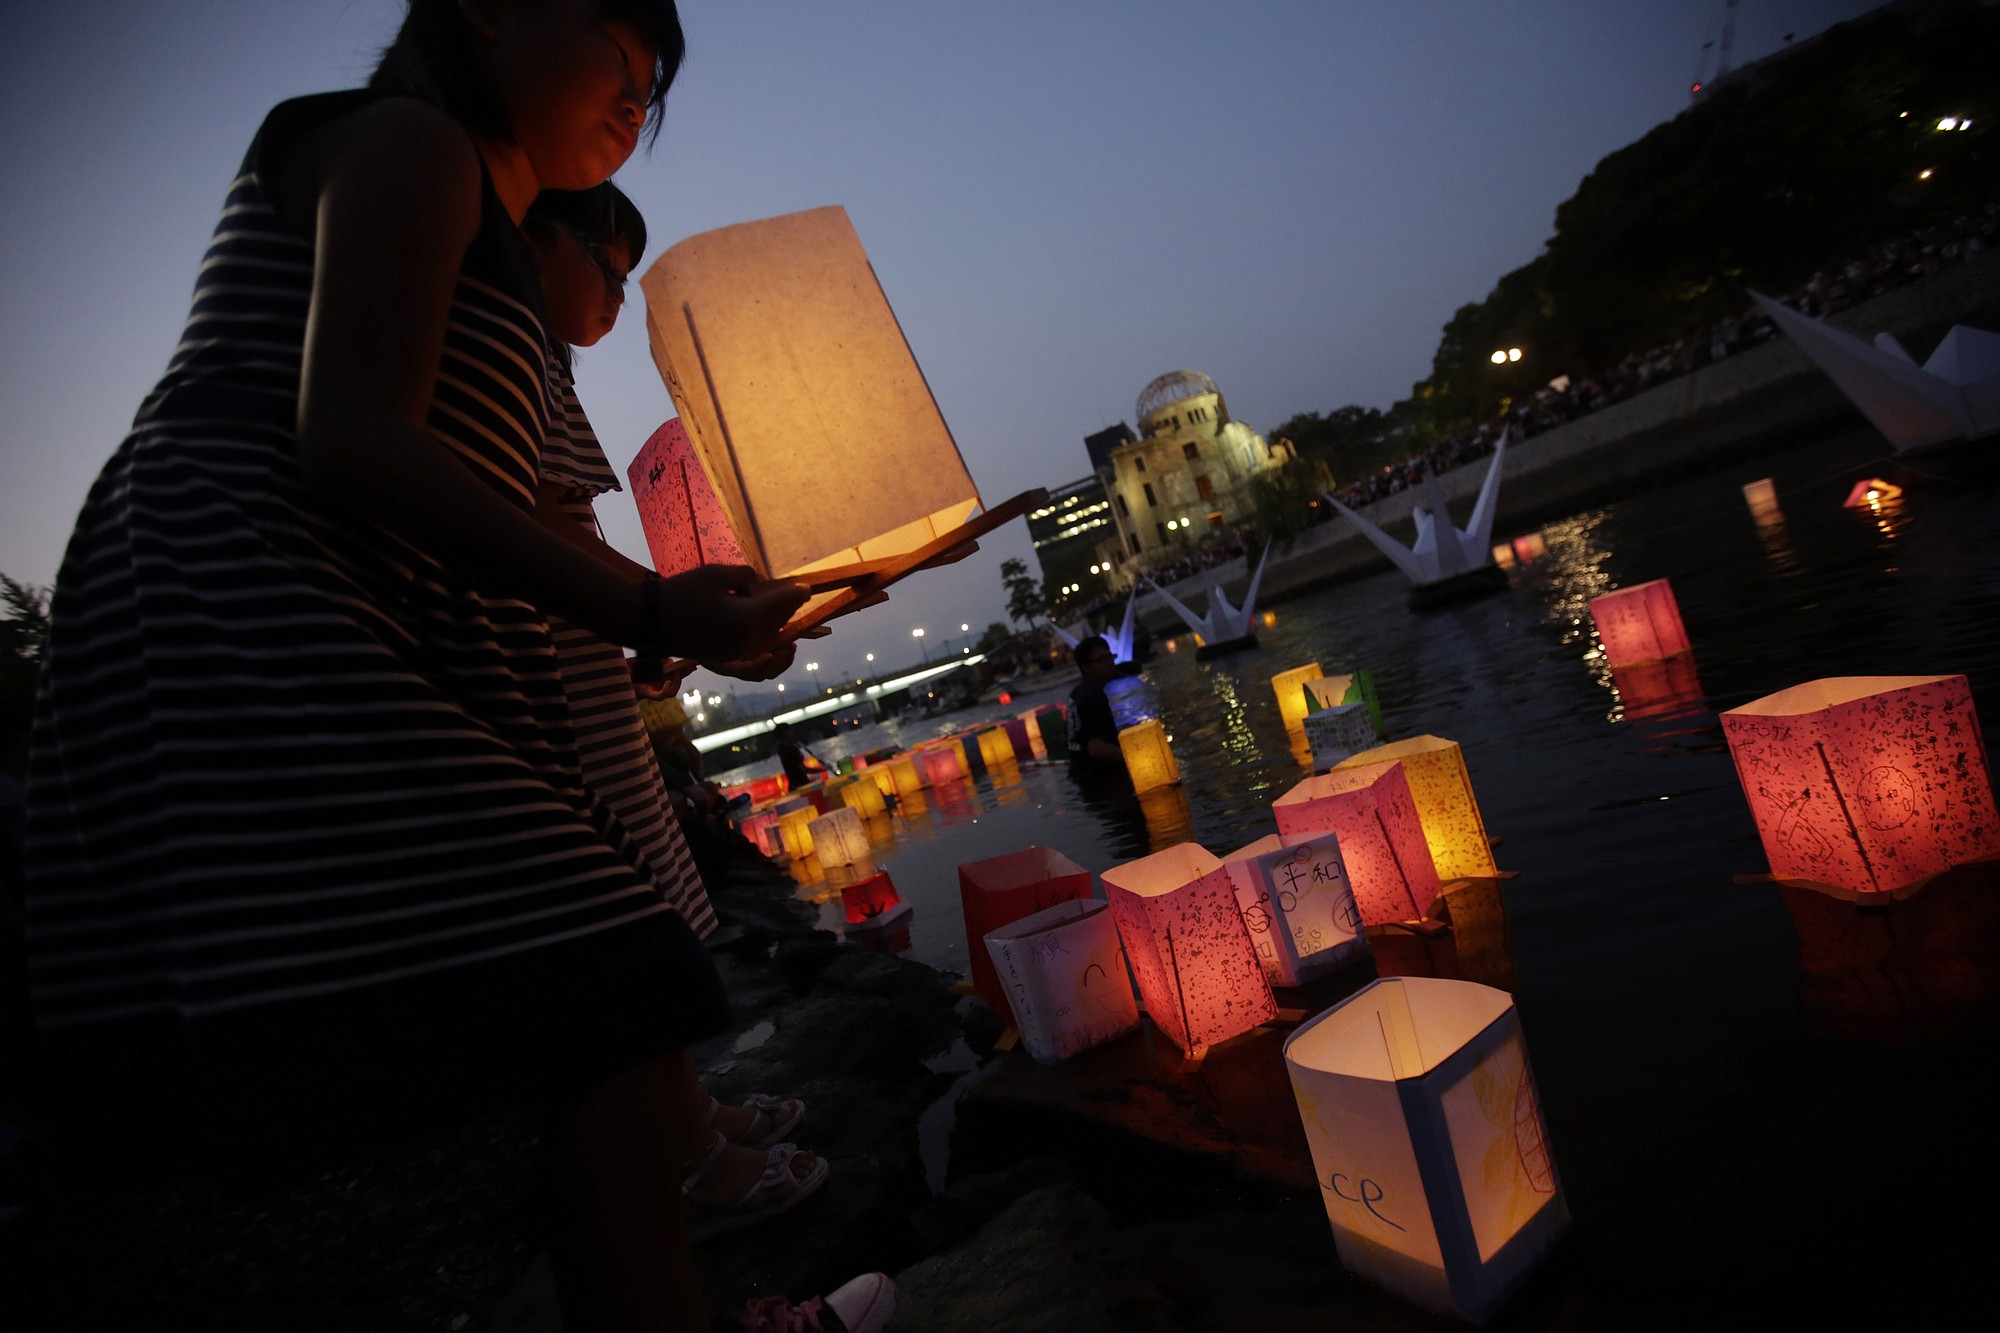 Children release paper lanterns Thursday on the Motoyasu River in Hiroshima, Japan,  where thousands of atomic bomb victims died.